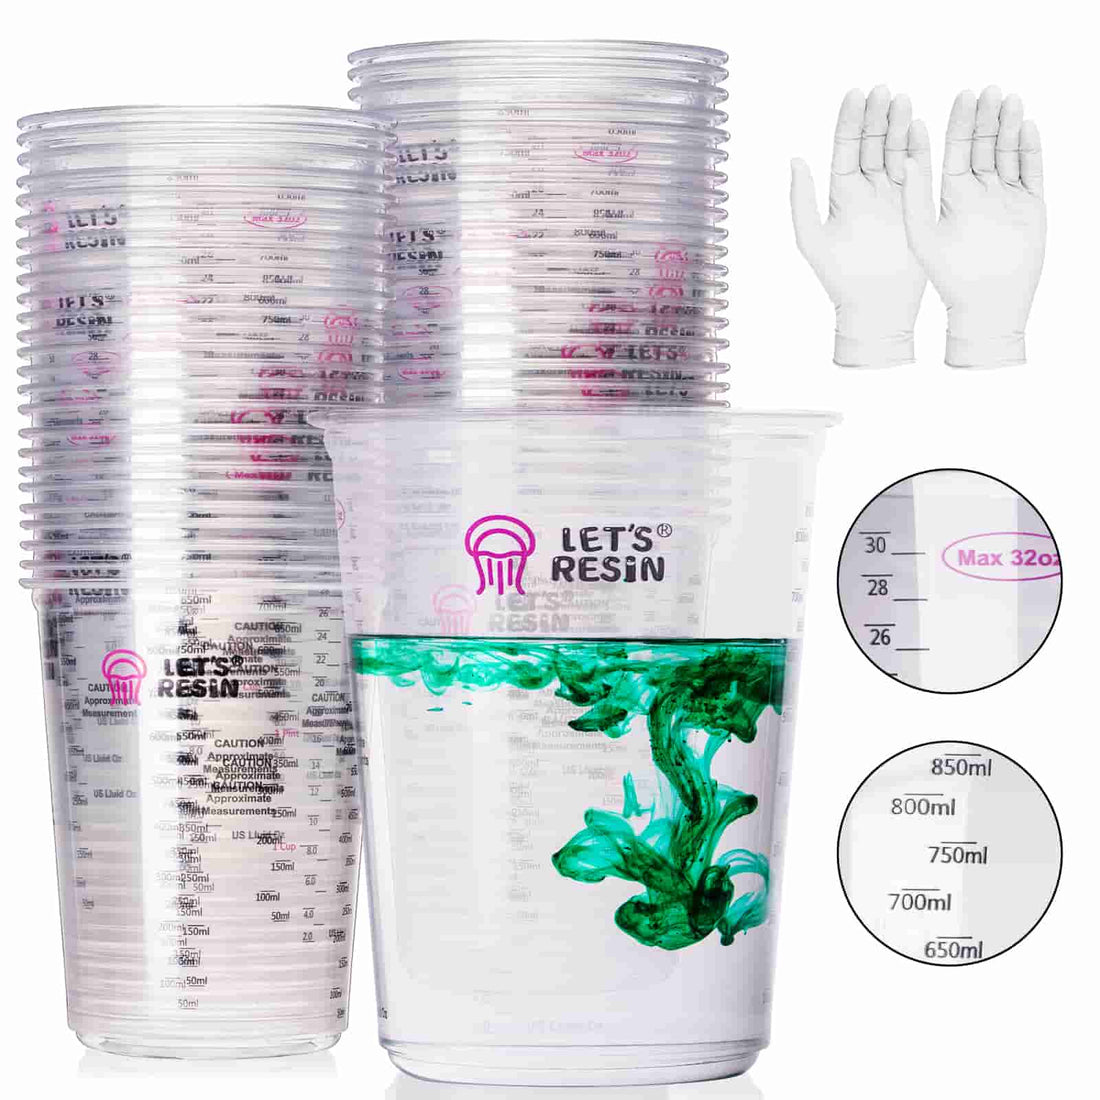 Blysk Graduated Plastic Mixing Cups, Use for Paint, Resin (Quart)